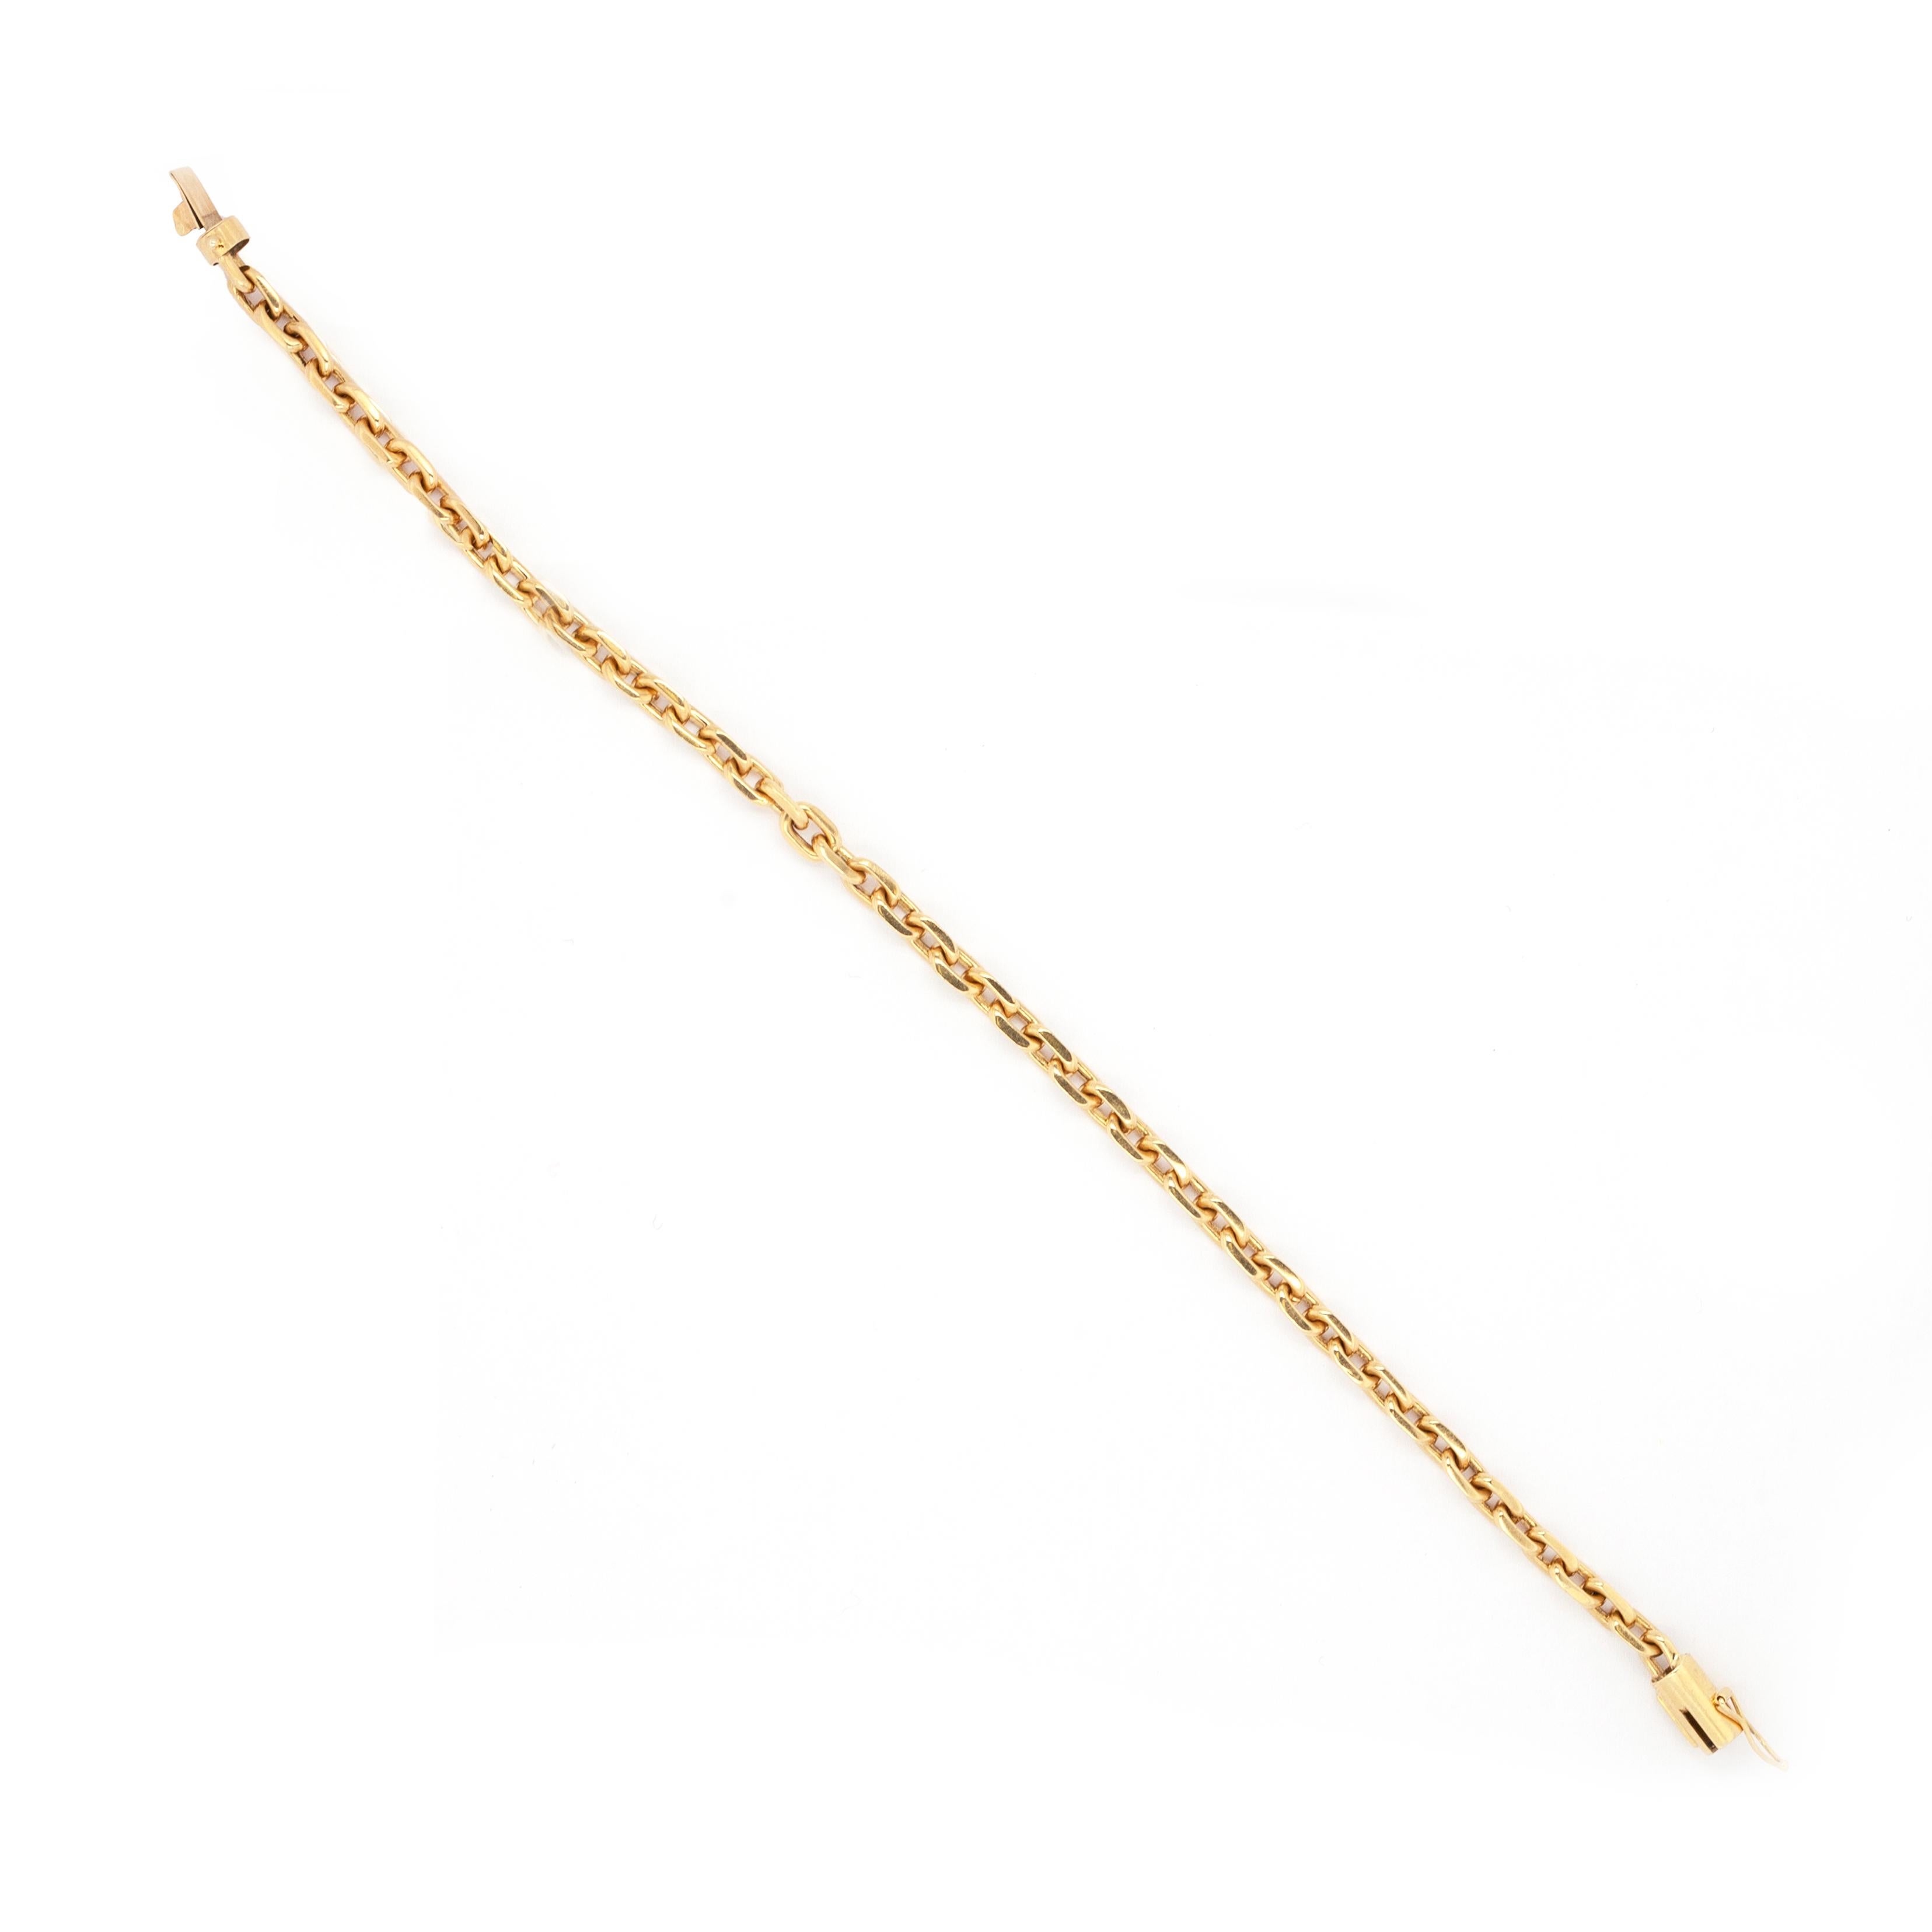 This classic bracelet by Tiffany & Co. embodies the timeless elegance and exquisite craftsmanship associated with the Tiffany & Co. brand, making it the perfect piece of jewellery you will undoubtedly wear again and again.

The bracelet showcases a